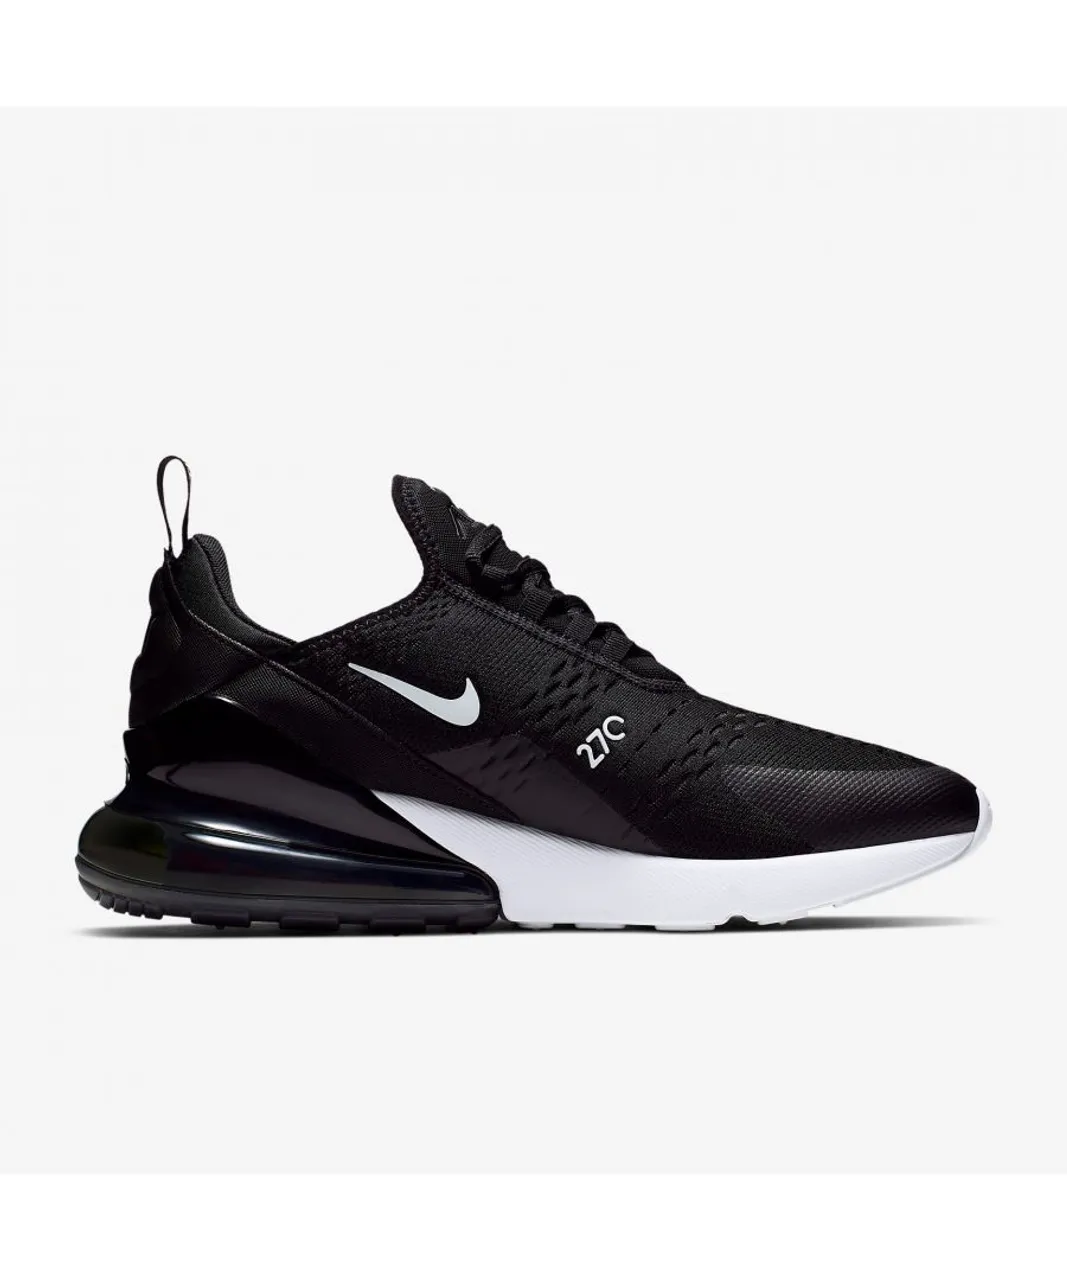 Nike Unisex Air Max 270 Trainers Black/White/Solar Red/Anthracite Mesh